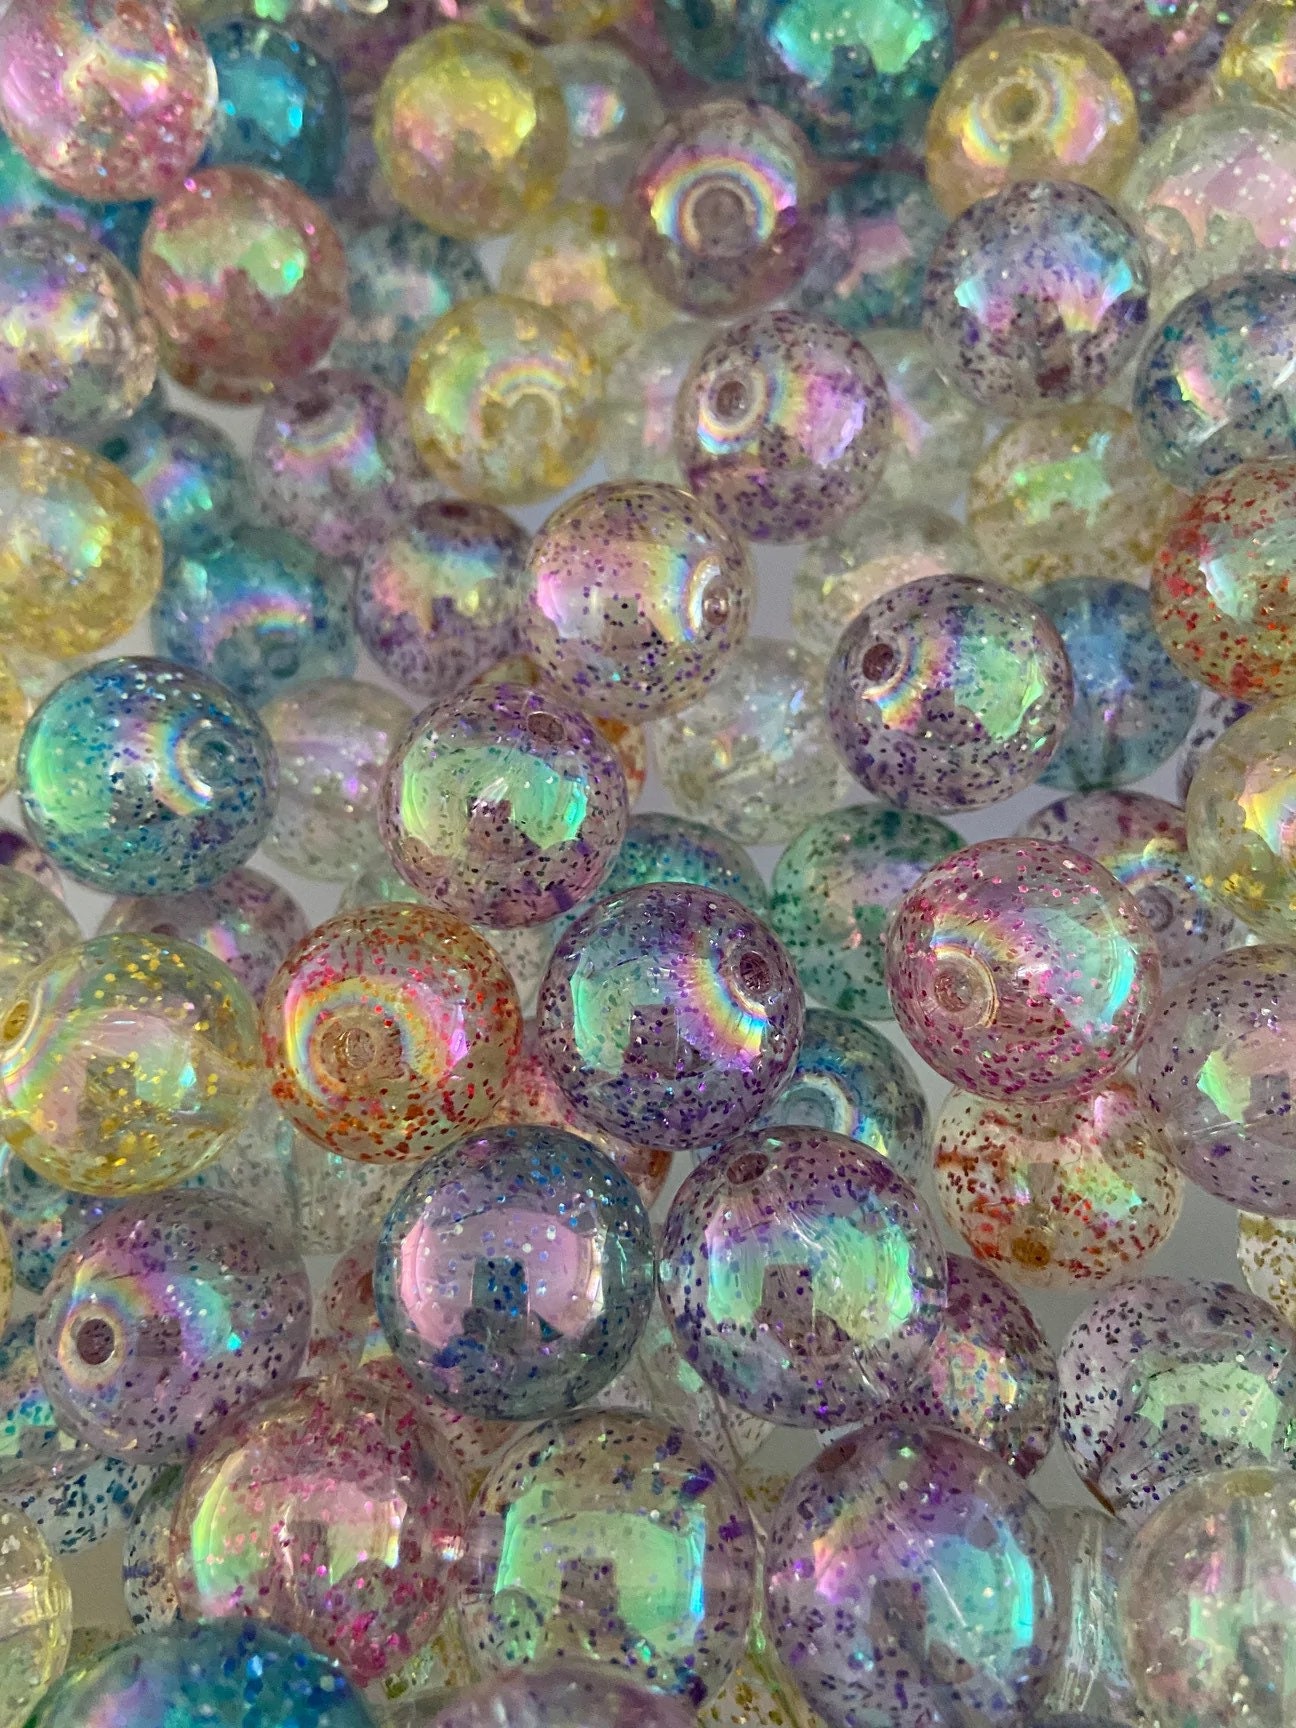 16mm Round Glitter Acrylic Beads for Jewelry Bracelets Necklace DIY Pen  Making, Gumball Bubblegum Beads, Acrylic Loose Beads 